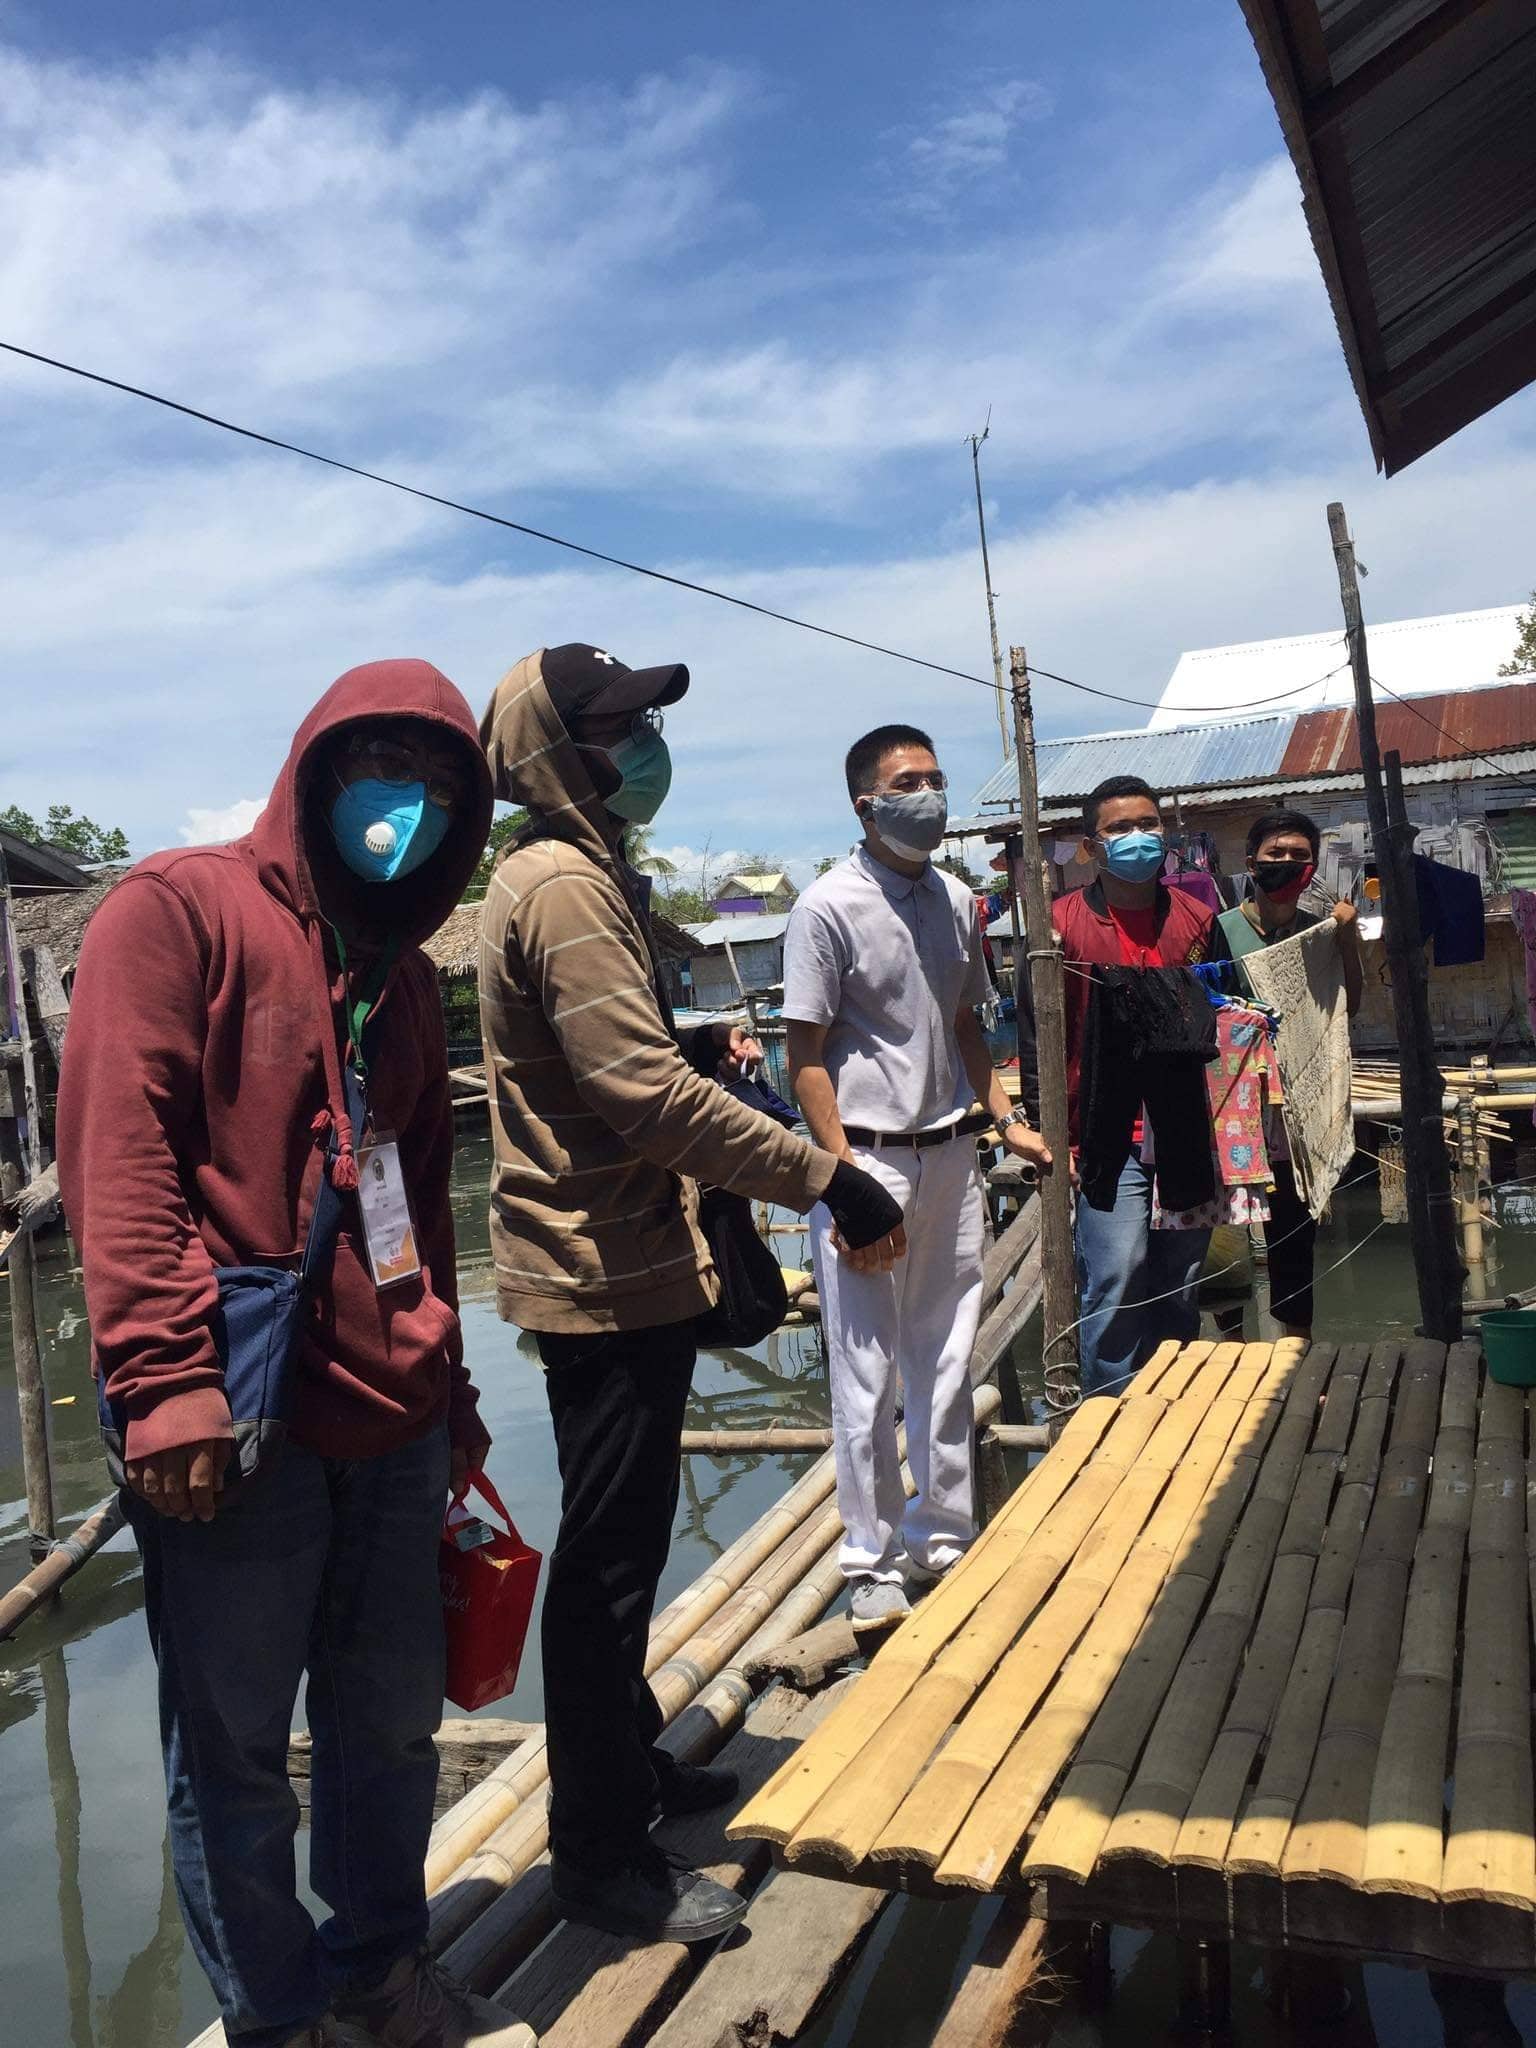 Alongside distributing masks, volunteers educate beneficiaries on how to protect themselves from the COVID-19 virus. 【Photo by Tzu Chi Zamboanga】